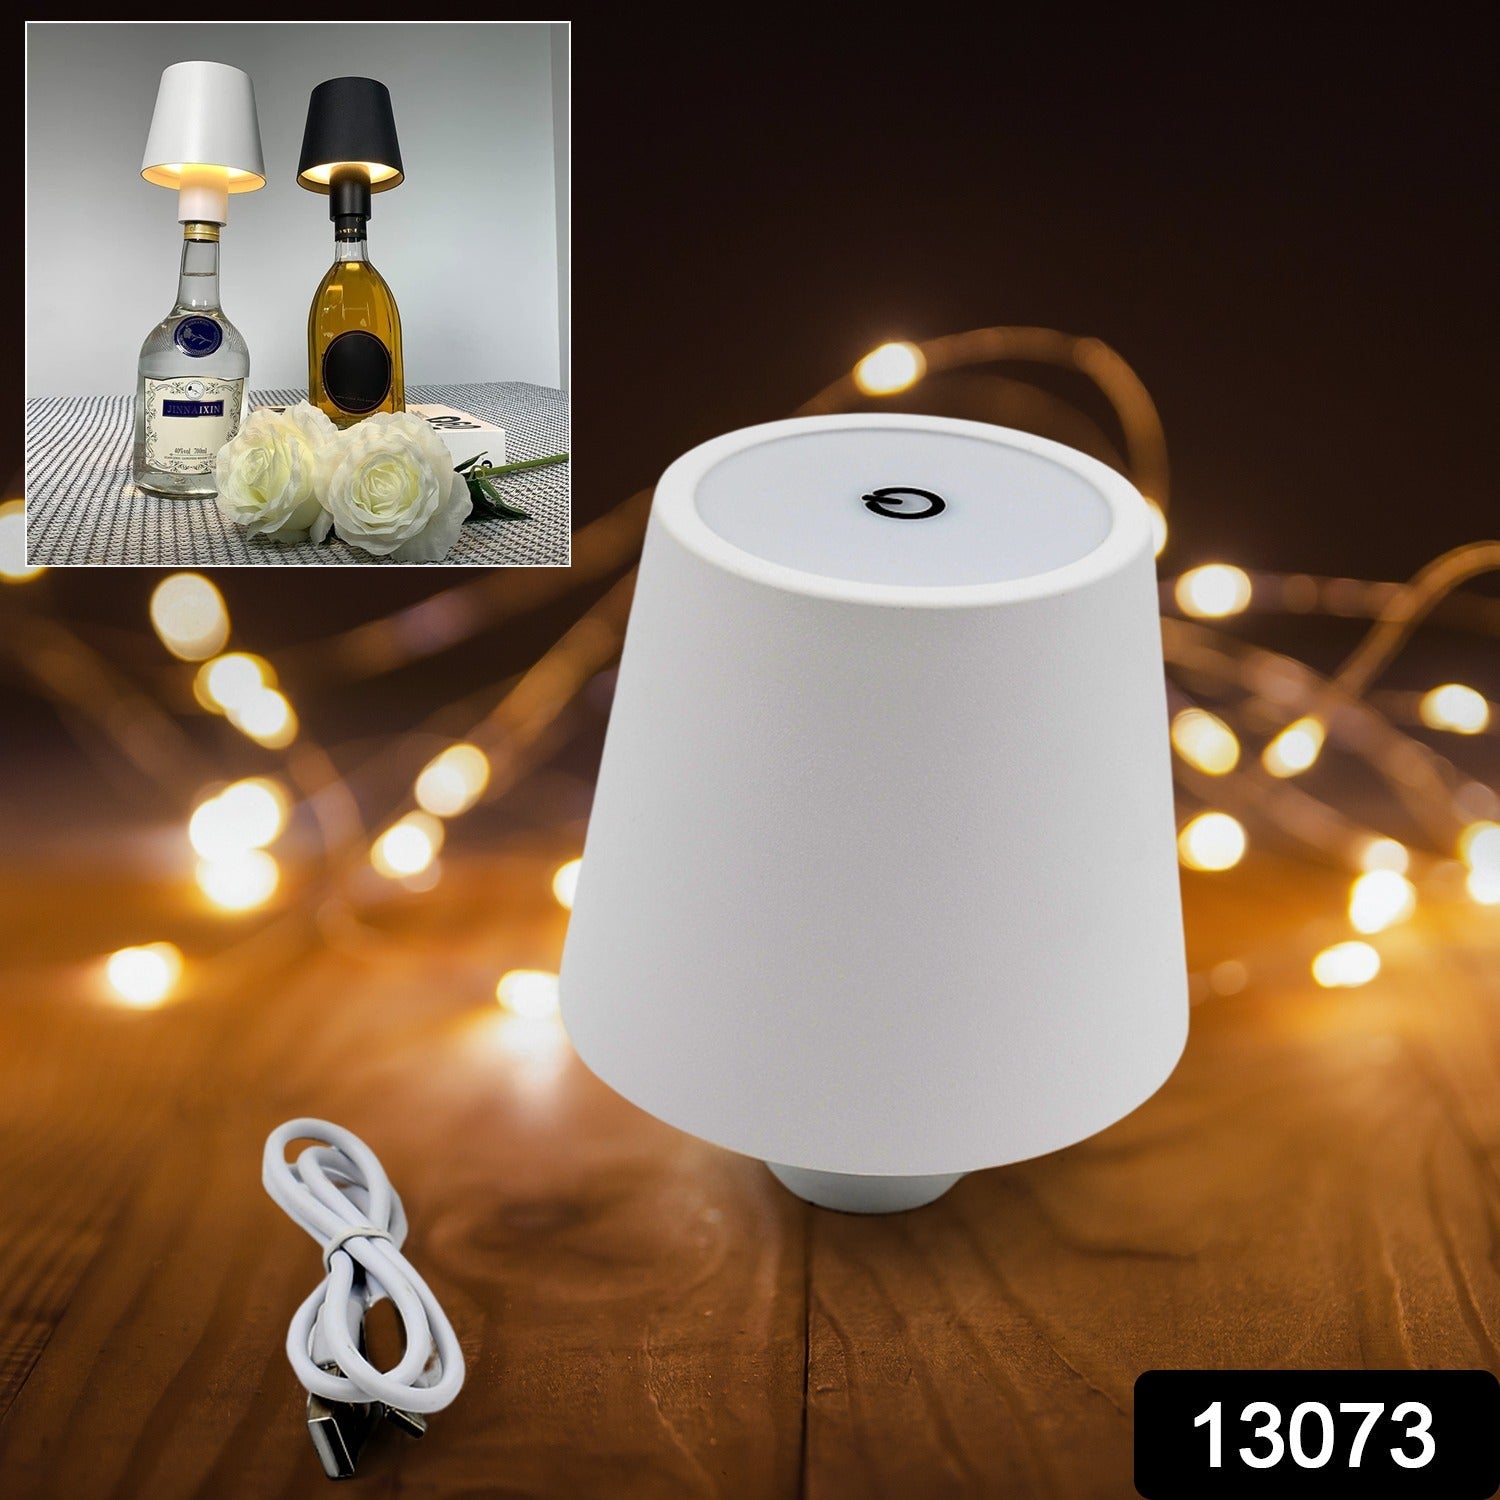 13073 LED Dimmable Bottle Lamp 3 Color Temperature, Wireless Table Lamp for Indoor and Outdoor, USB Rechargeable Bottle Lamp for Family, Restaurant & Bar (1 Pc)